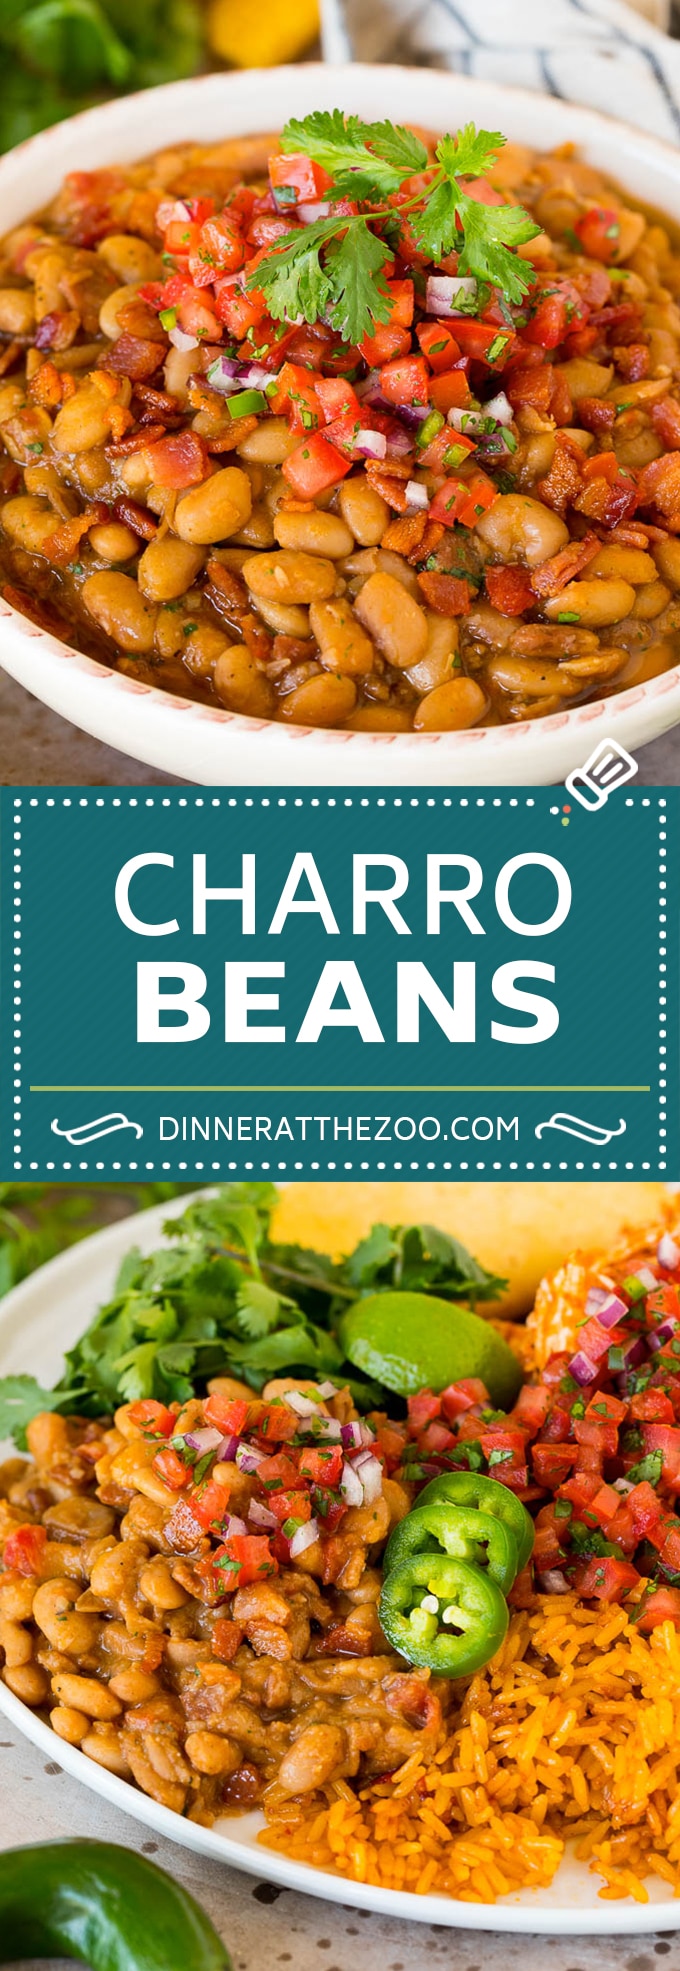 These charro beans are pinto beans simmered with bacon, tomatoes, chiles and spices, all in a hearty broth.